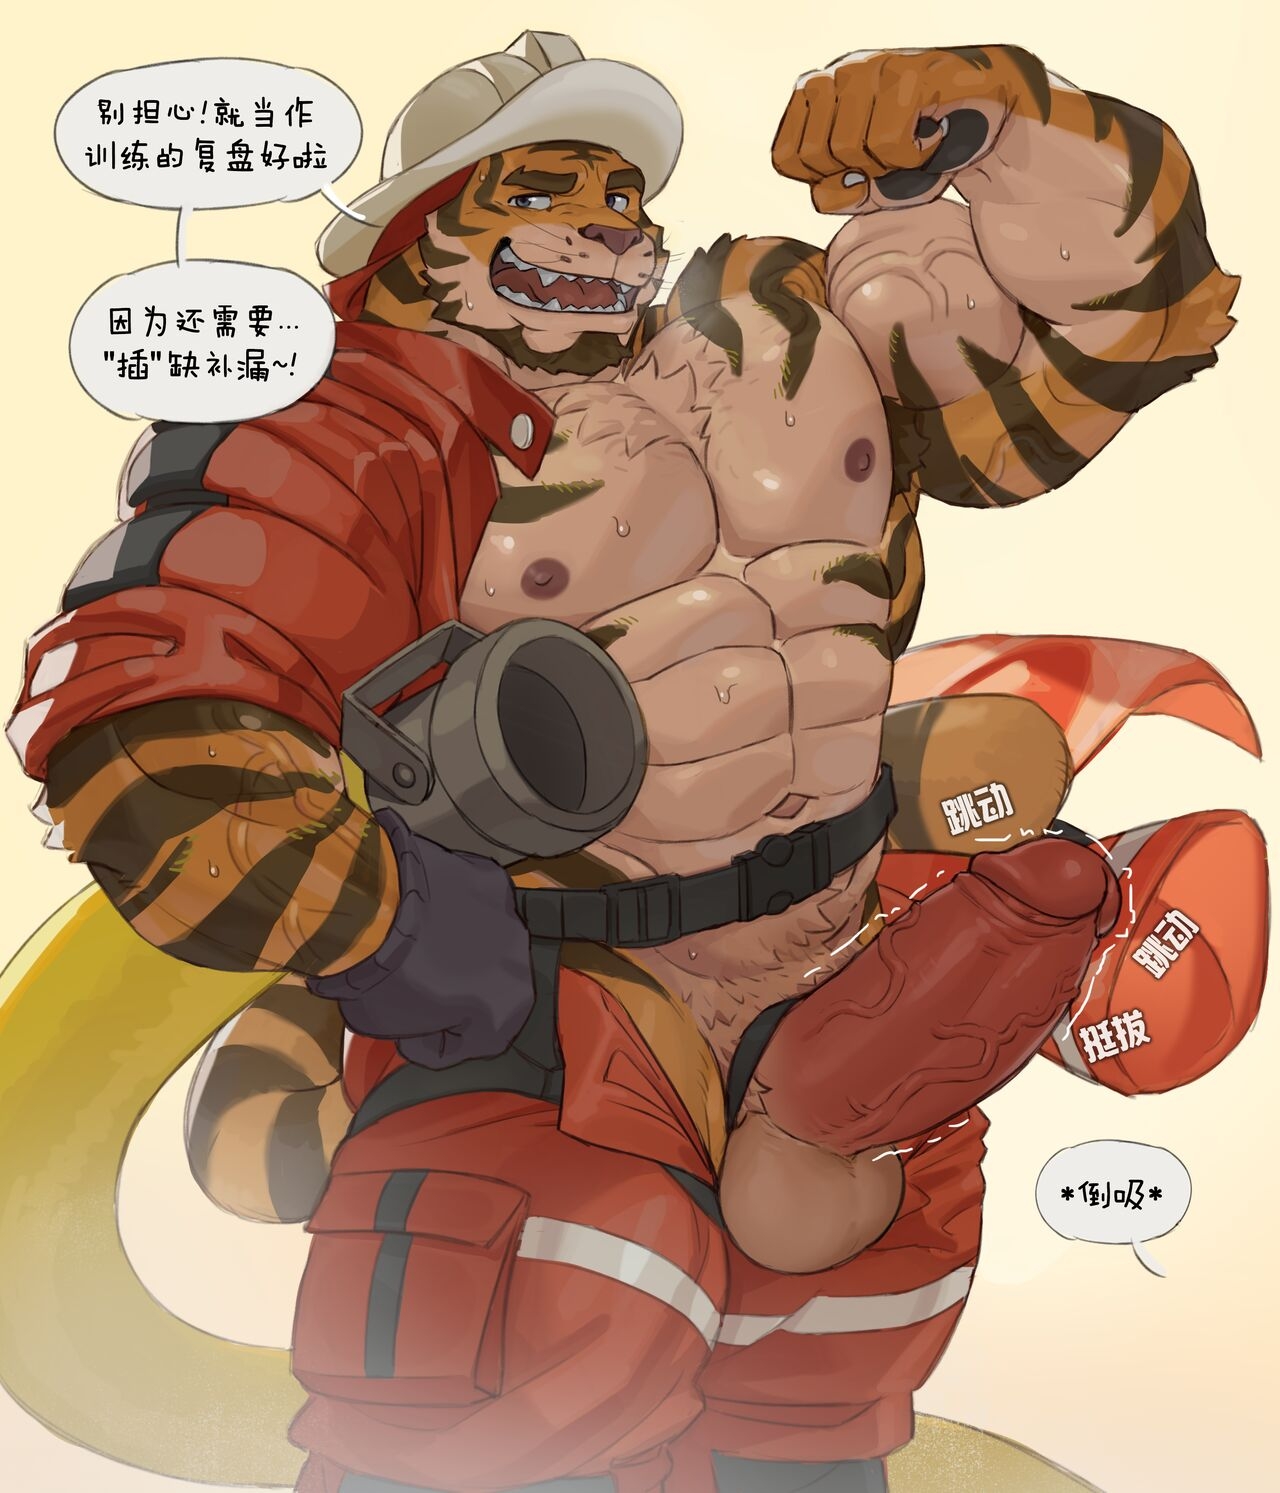 [Imatoart] Tiger Fire Chief's Training Session | 老虎消防队长的训练时间! [Chinese][Translated by Chrome Heart Tags] 8